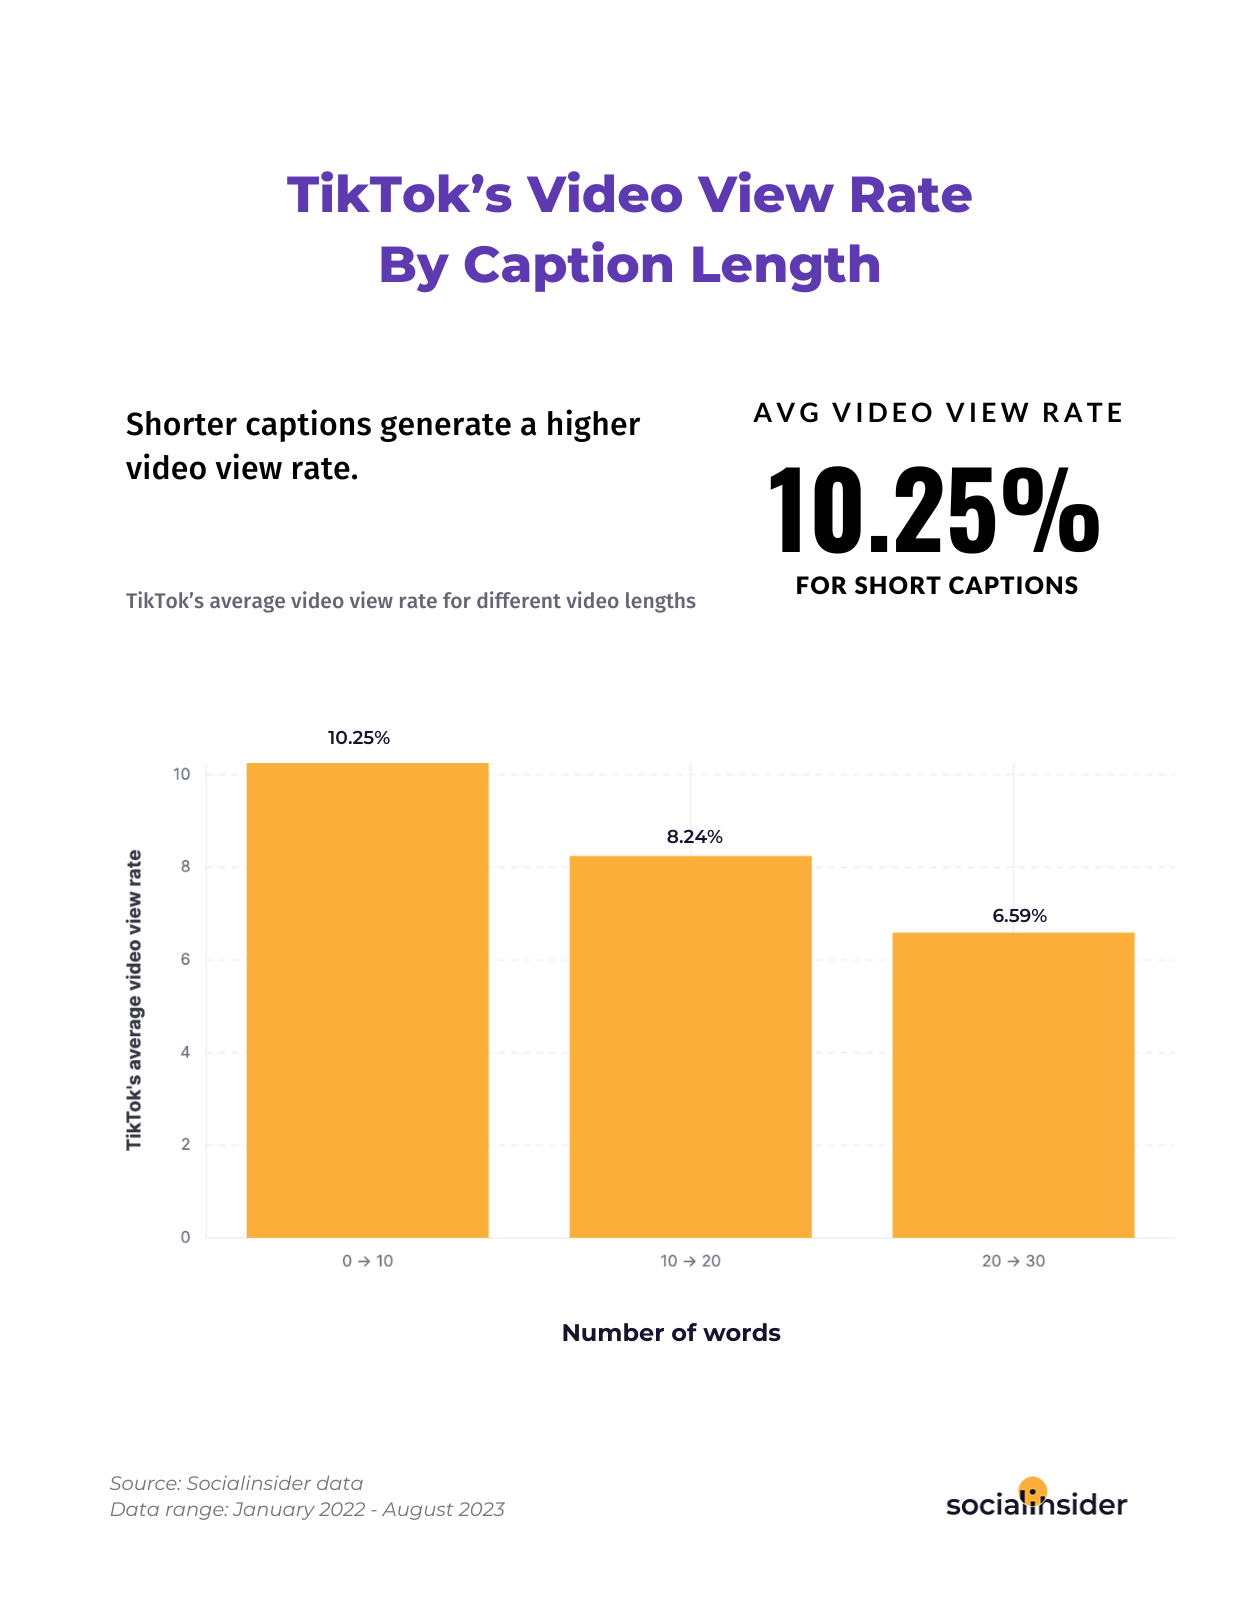 This chart shows TikTok's average video view rates for different caption lengths.